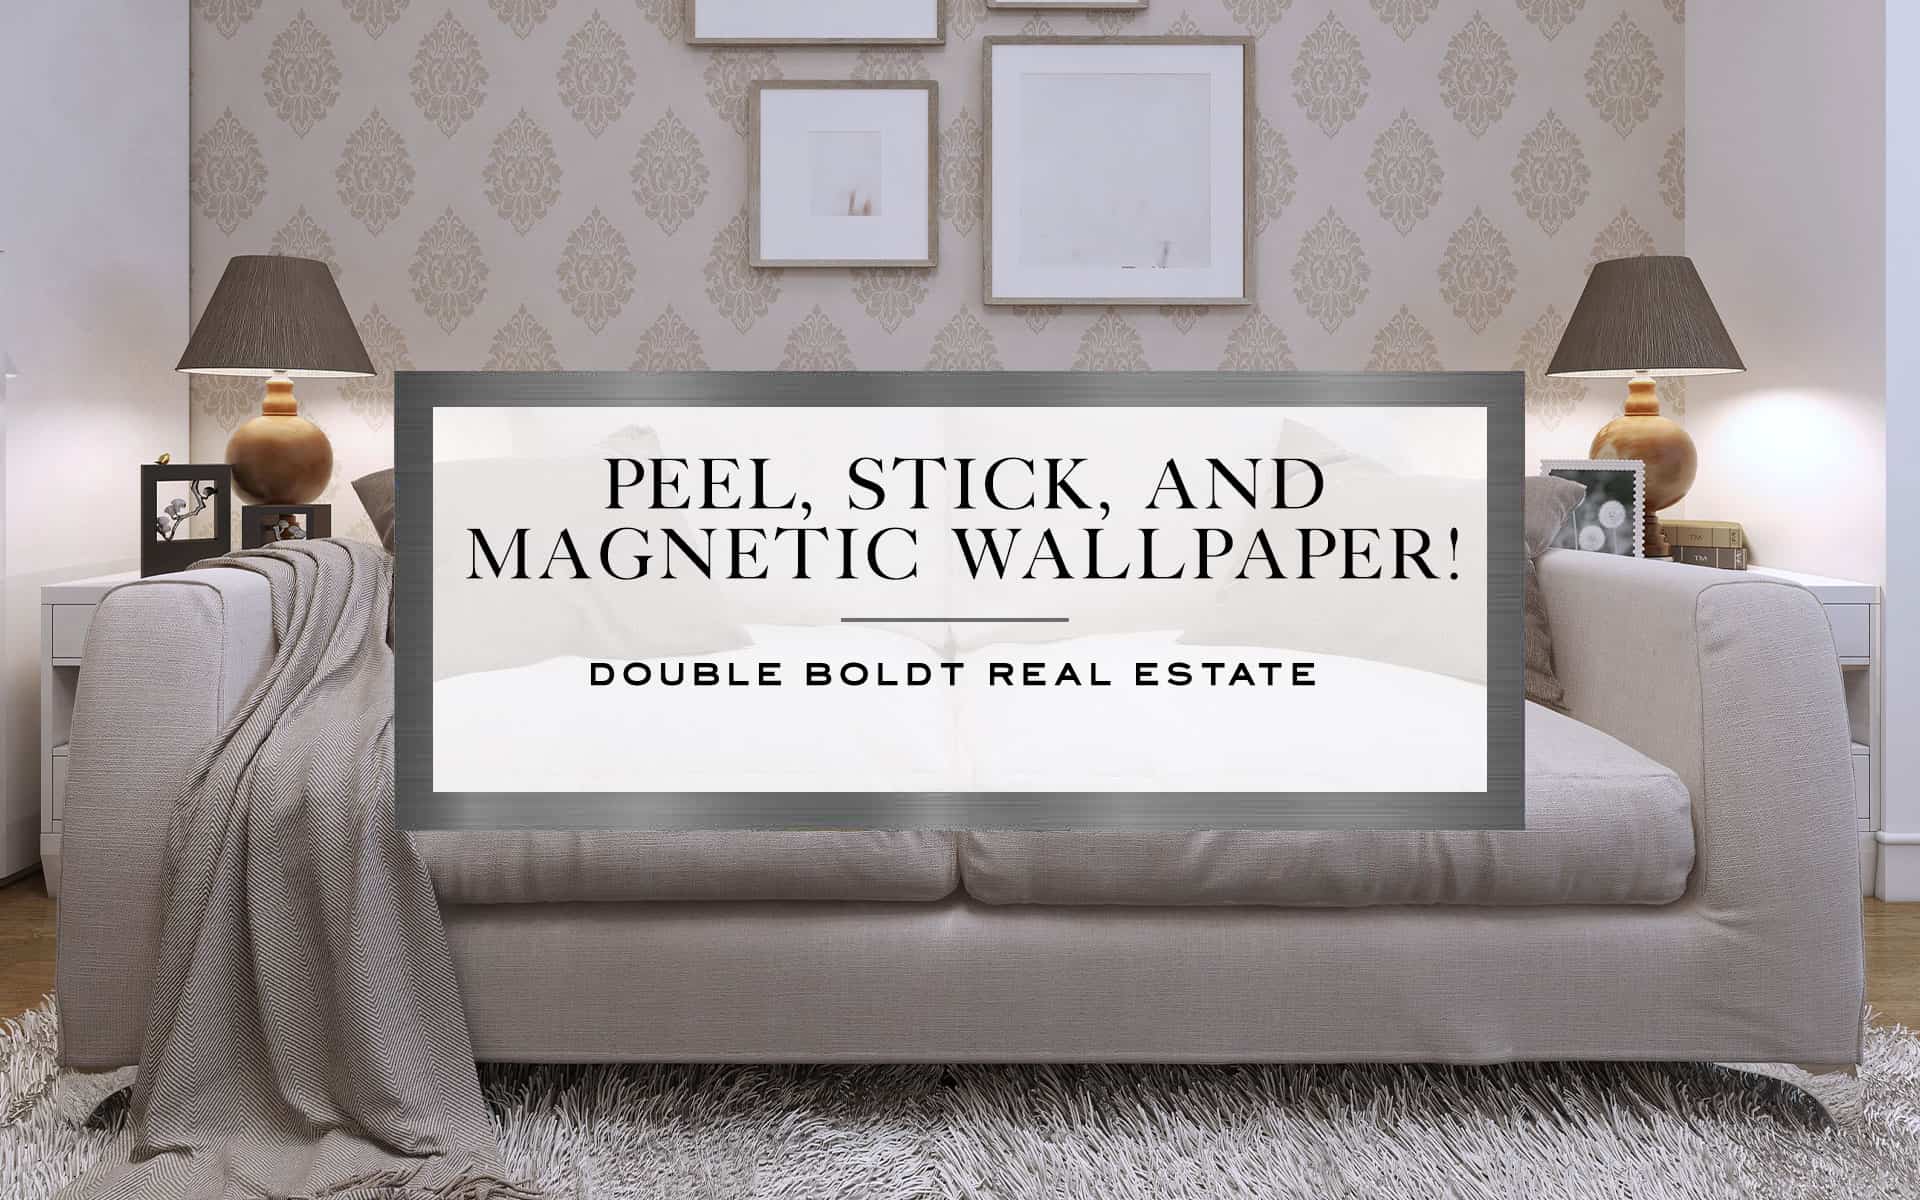 Peel, Stick, and Magnetic Wallpaper!